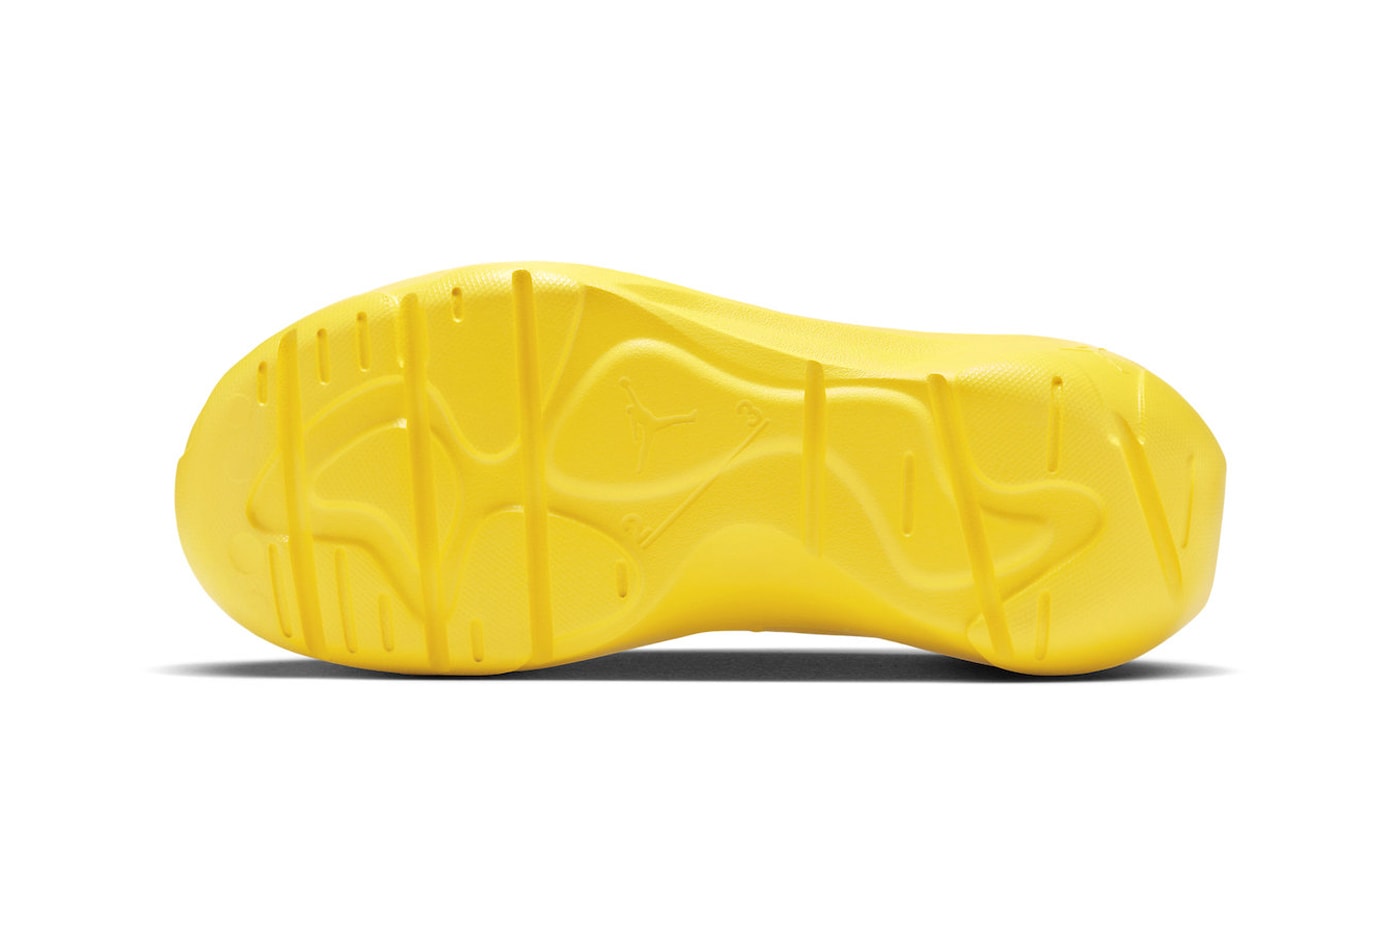 Jordan System.23 "Yellow" Is Bold and Ready for the Summer bright canary yellow clogs water shoes DN4890-701 release info jordan brand nike michael jordan